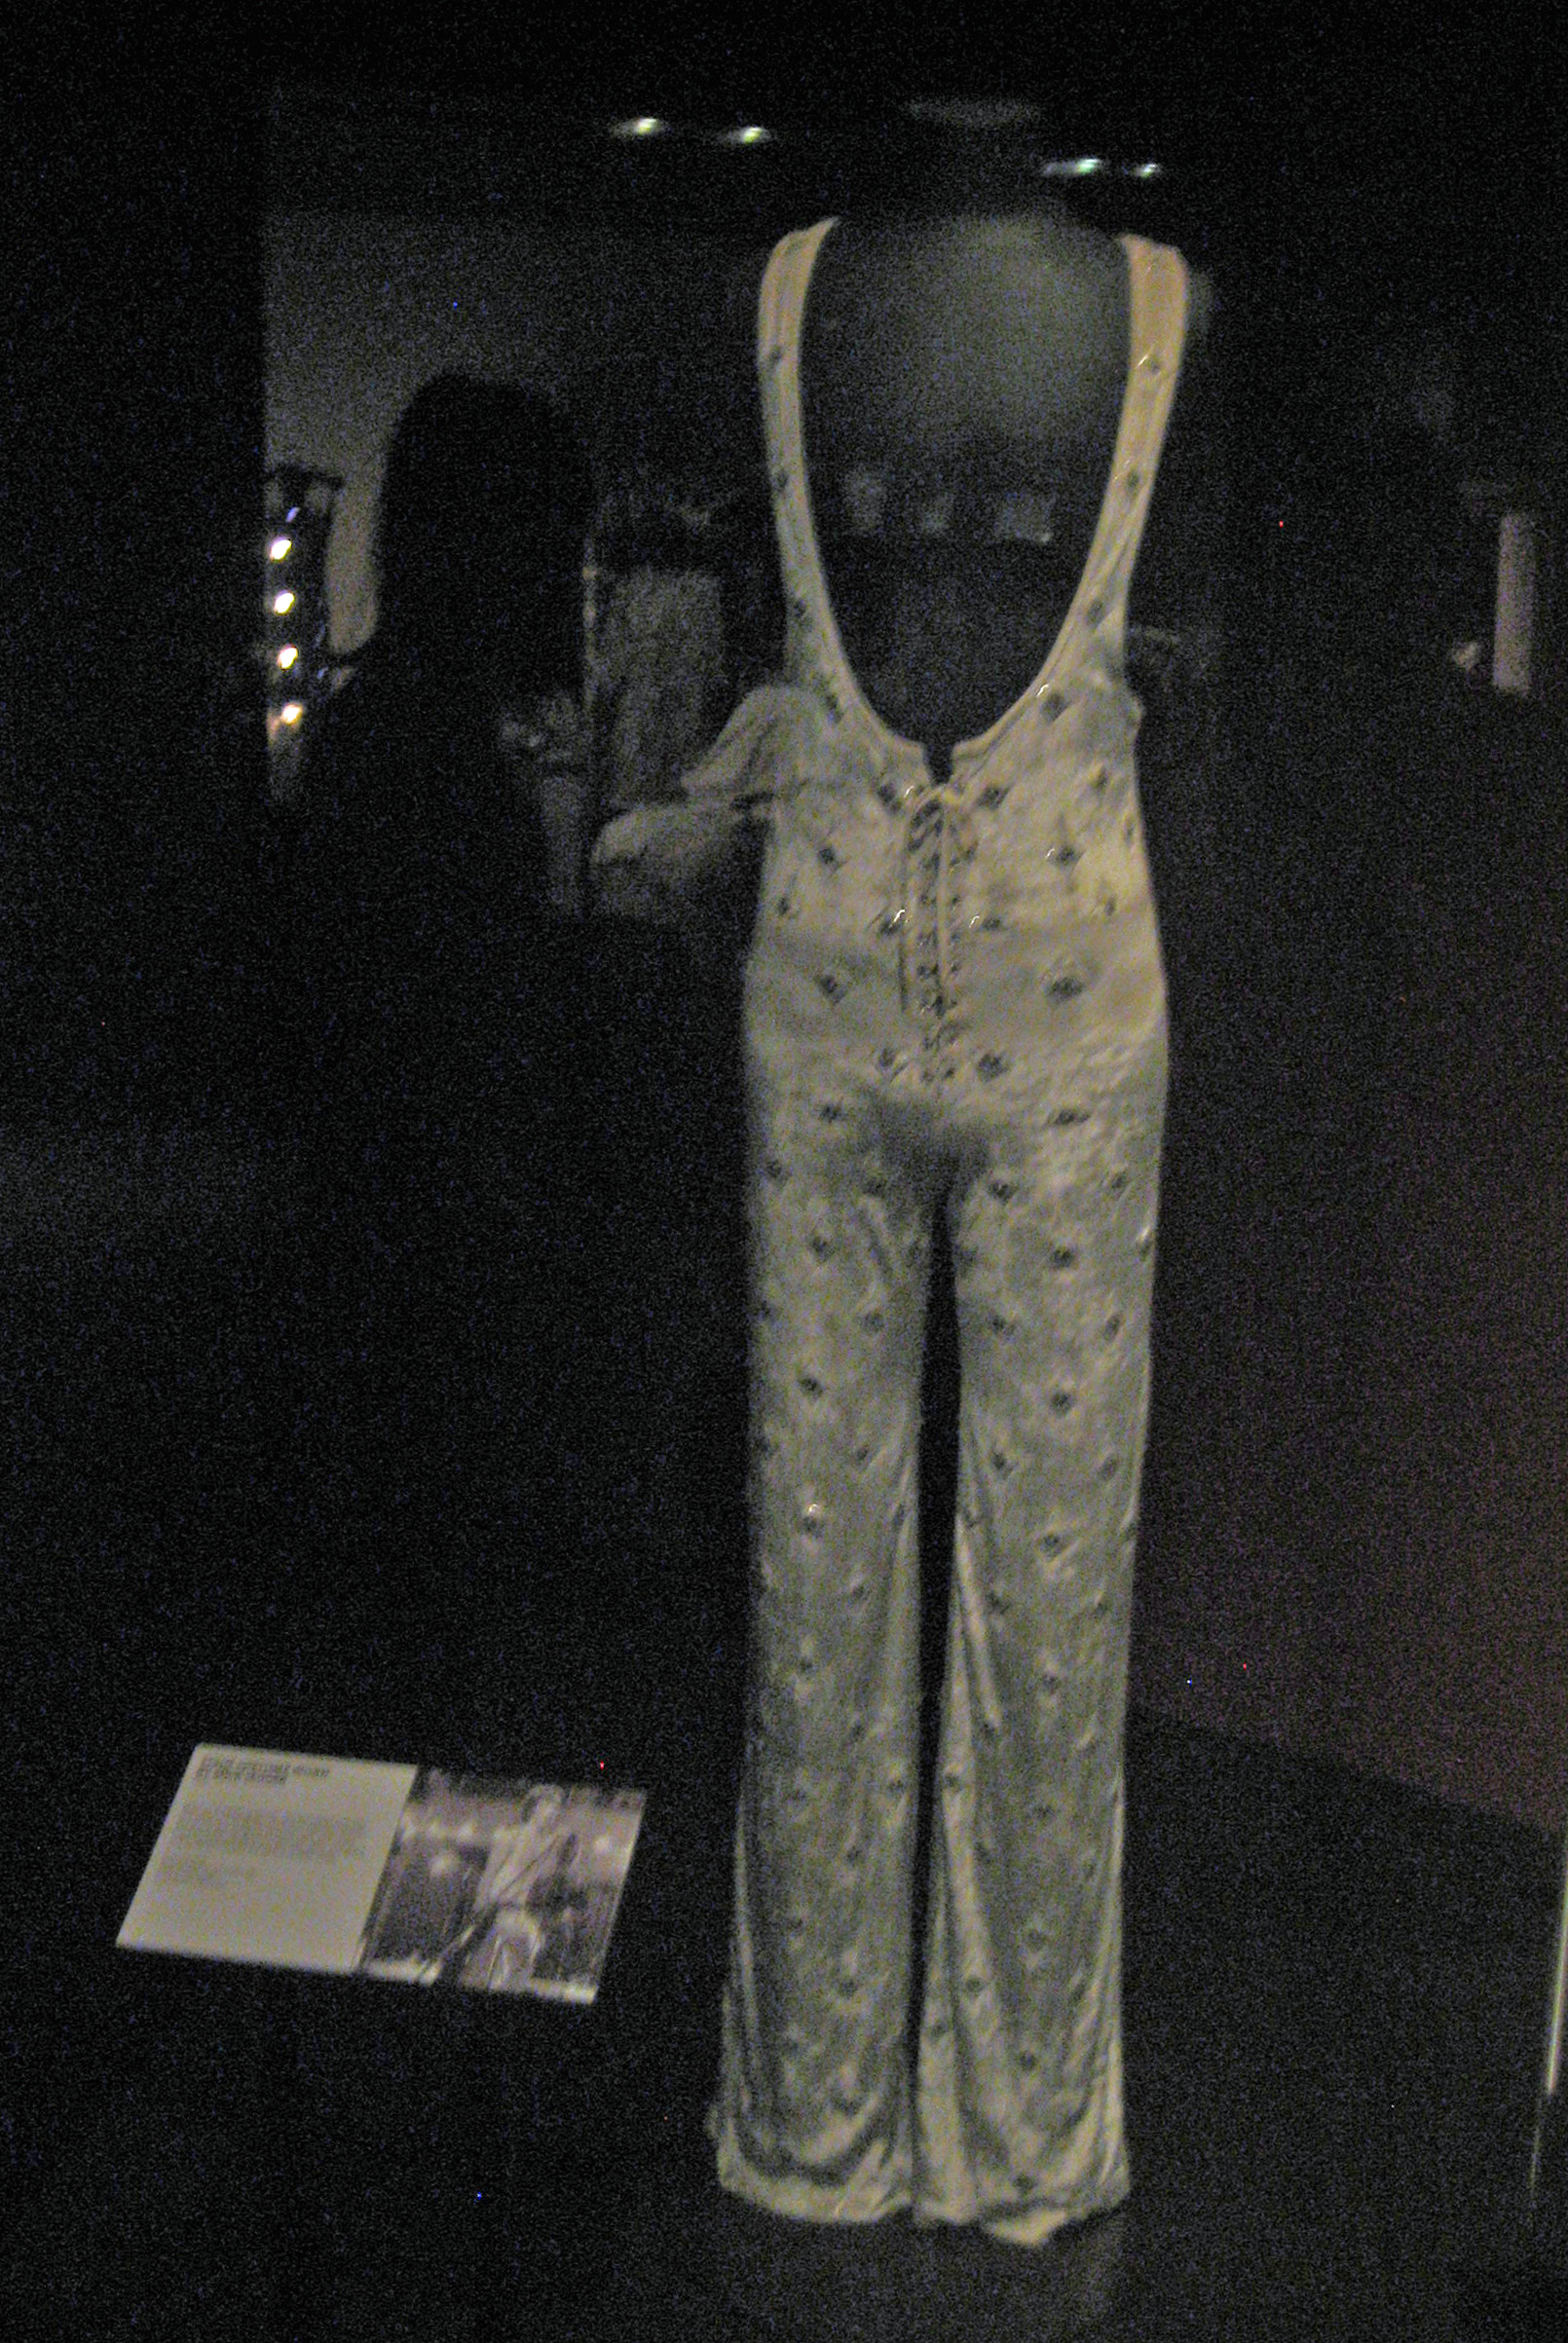  Mick Jagger stage costume